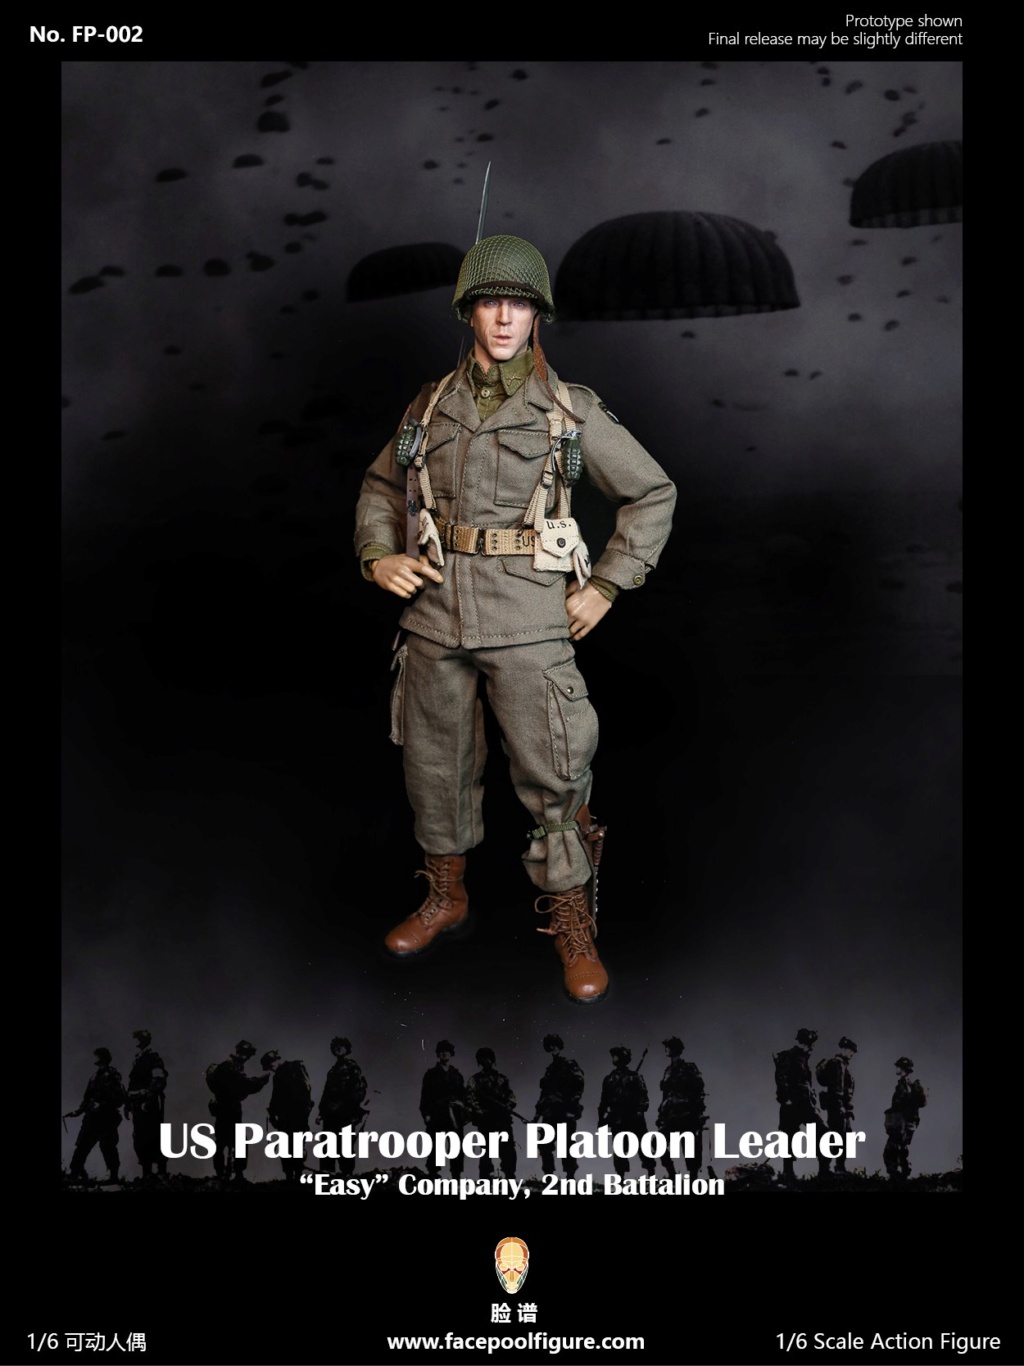 wwii - NEW PRODUCT: FACEPOOLFIGURE: 1/6 WWII US Airborne Division E Company Captain FP002# 12163010